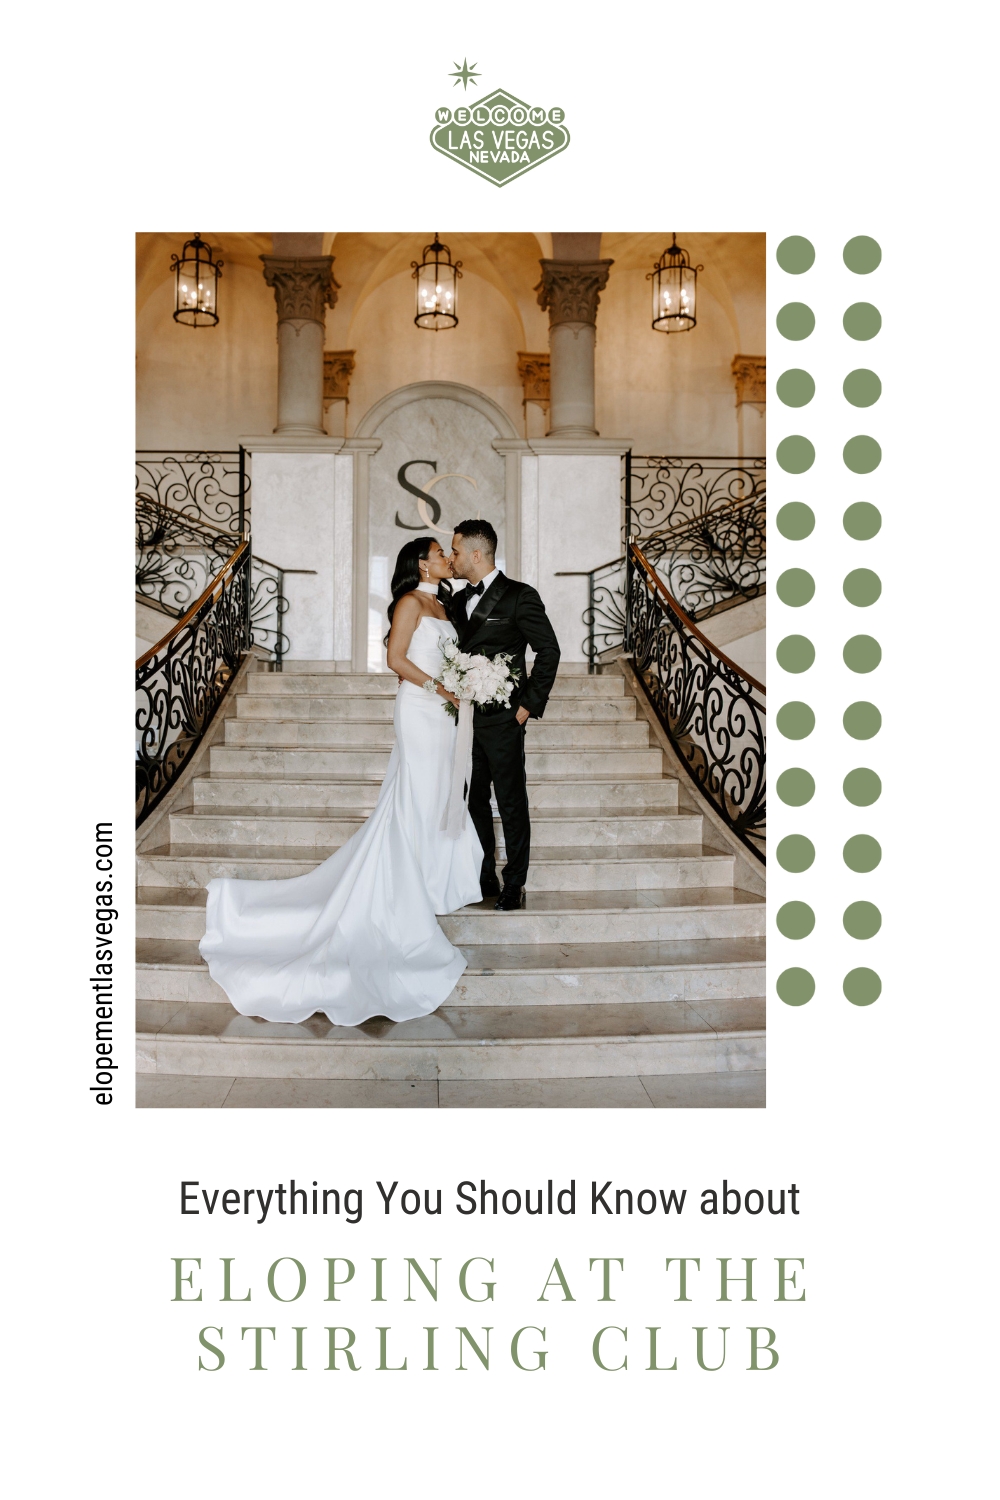 Bride and groom sharing a kiss on the stairs; image overlaid with text that reads Everything You Should Know About Eloping at The Stirling Club